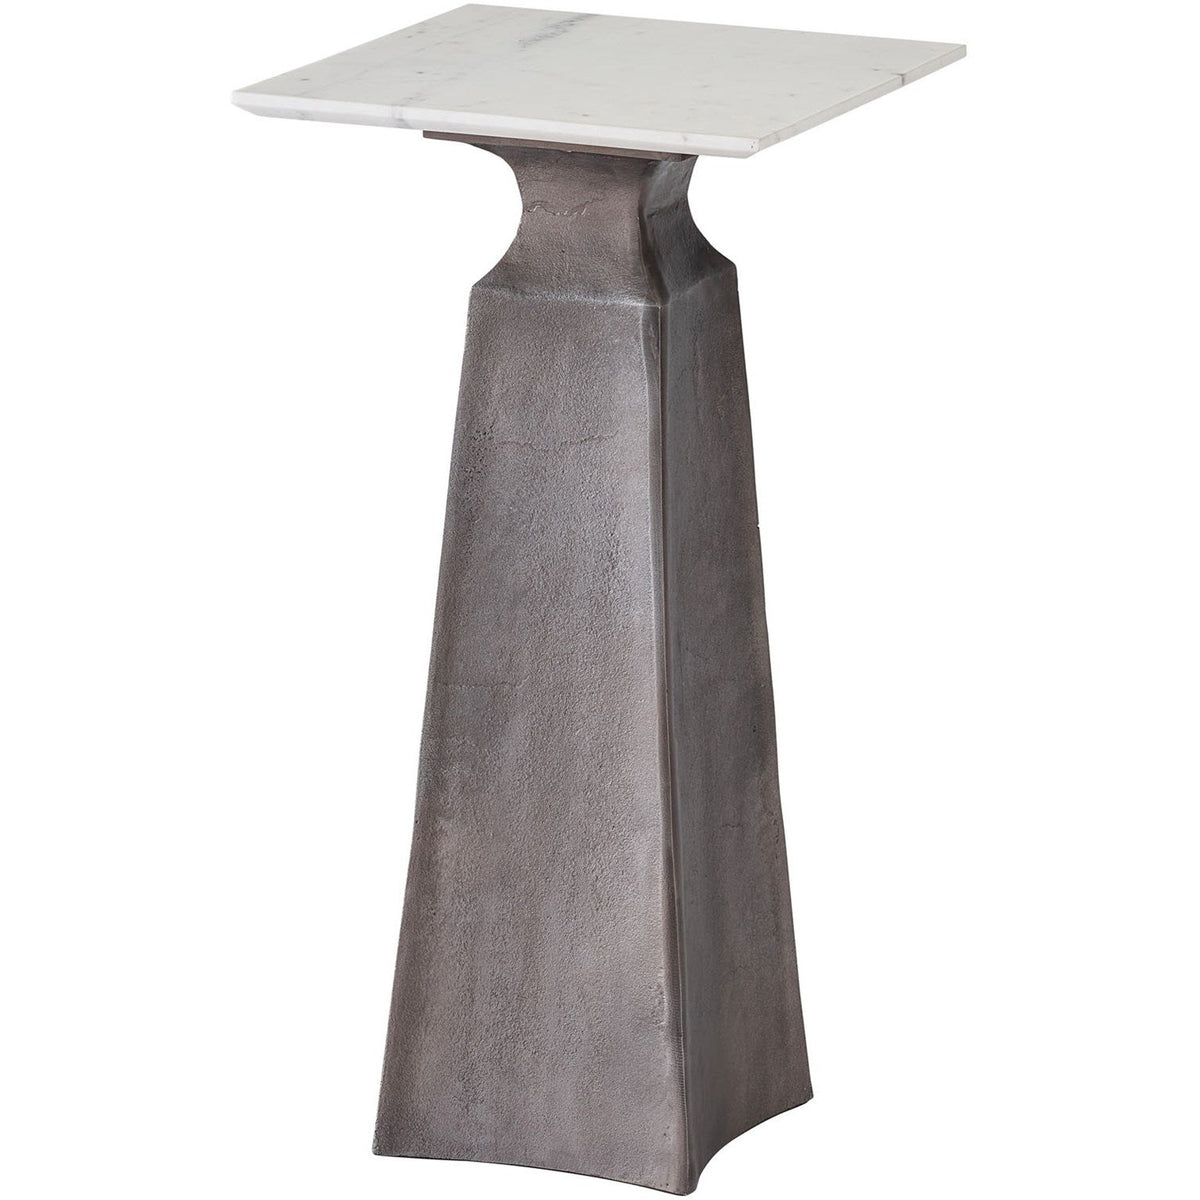 Figuration Side Table - Be Bold Furniture